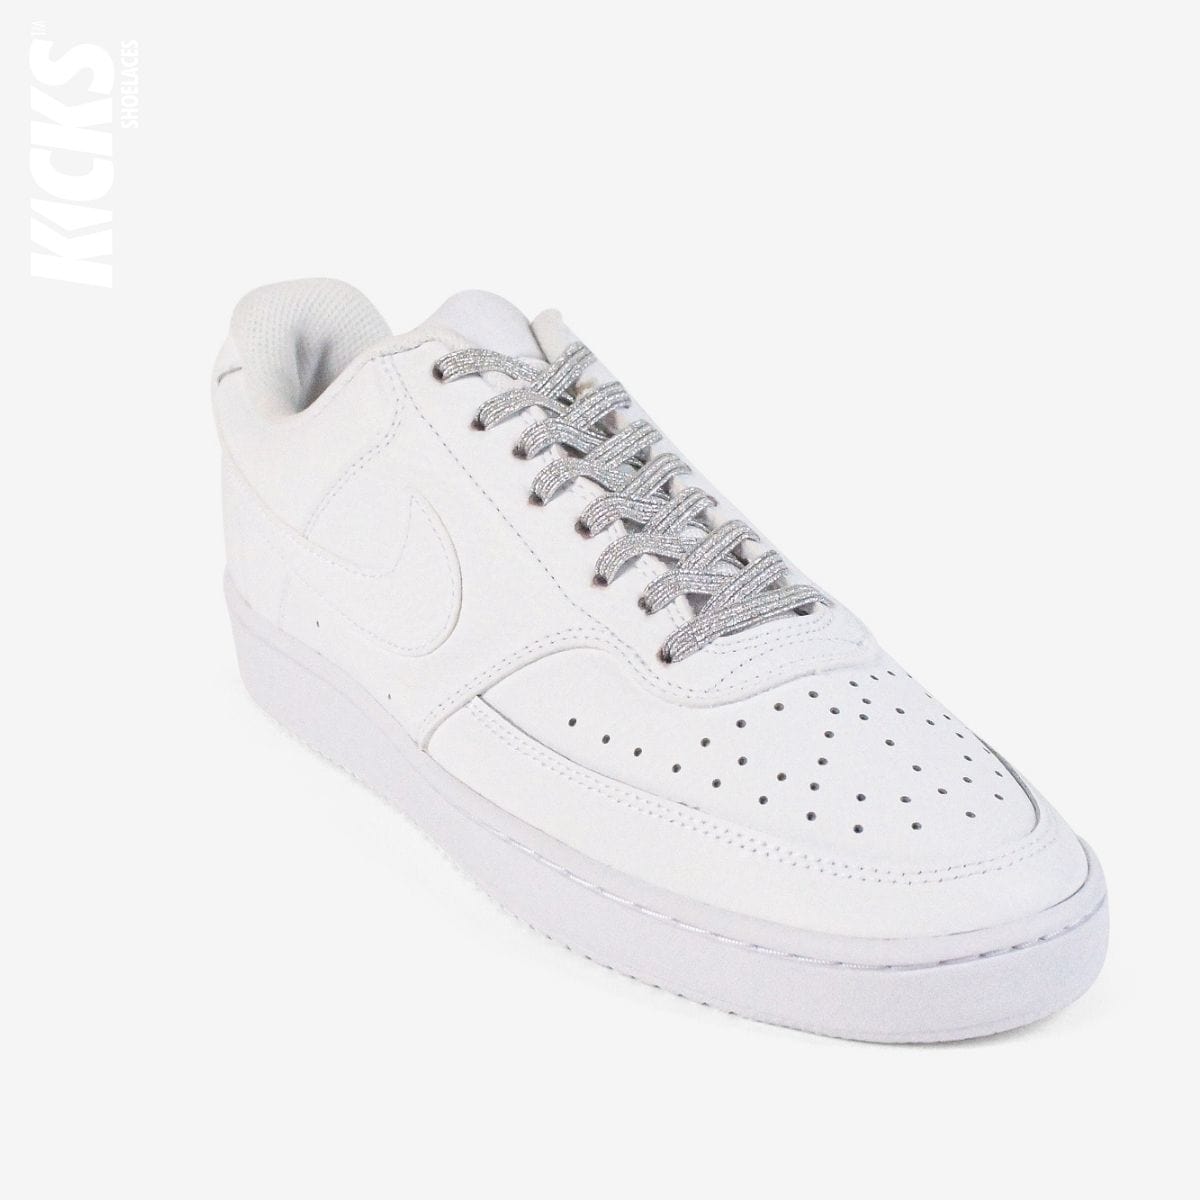 elastic-no-tie-shoelaces-with-silver-laces-on-nike-white-sneakers